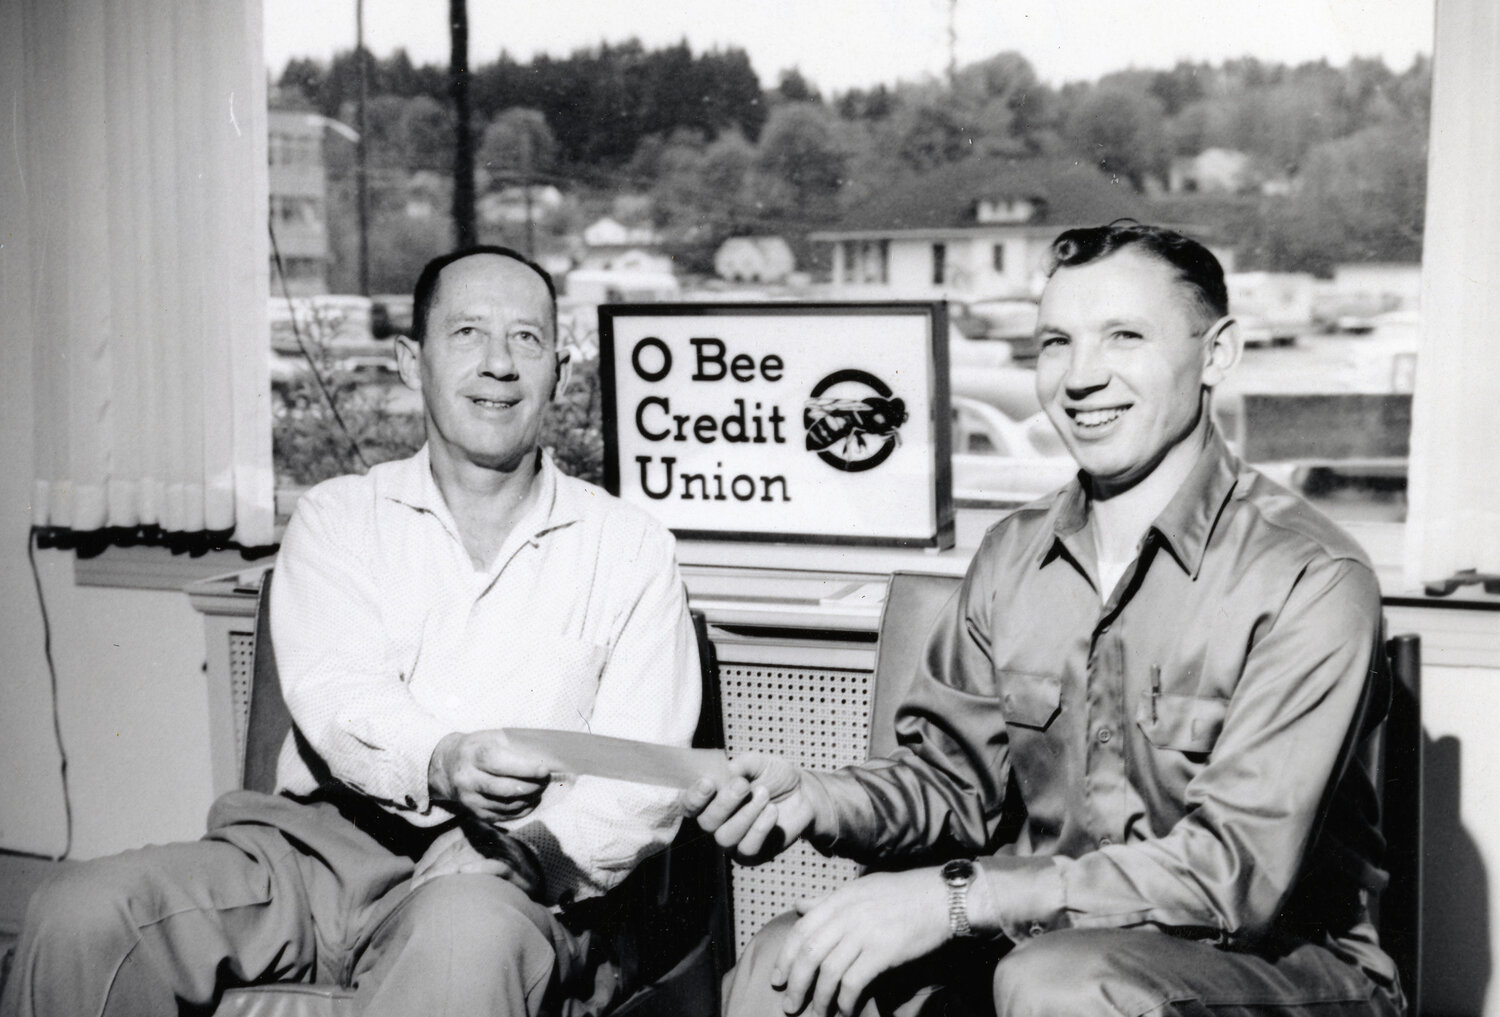 Ted McGill, left, is pictured with an O Bee Credit Union member in this photo provided by the credit union.